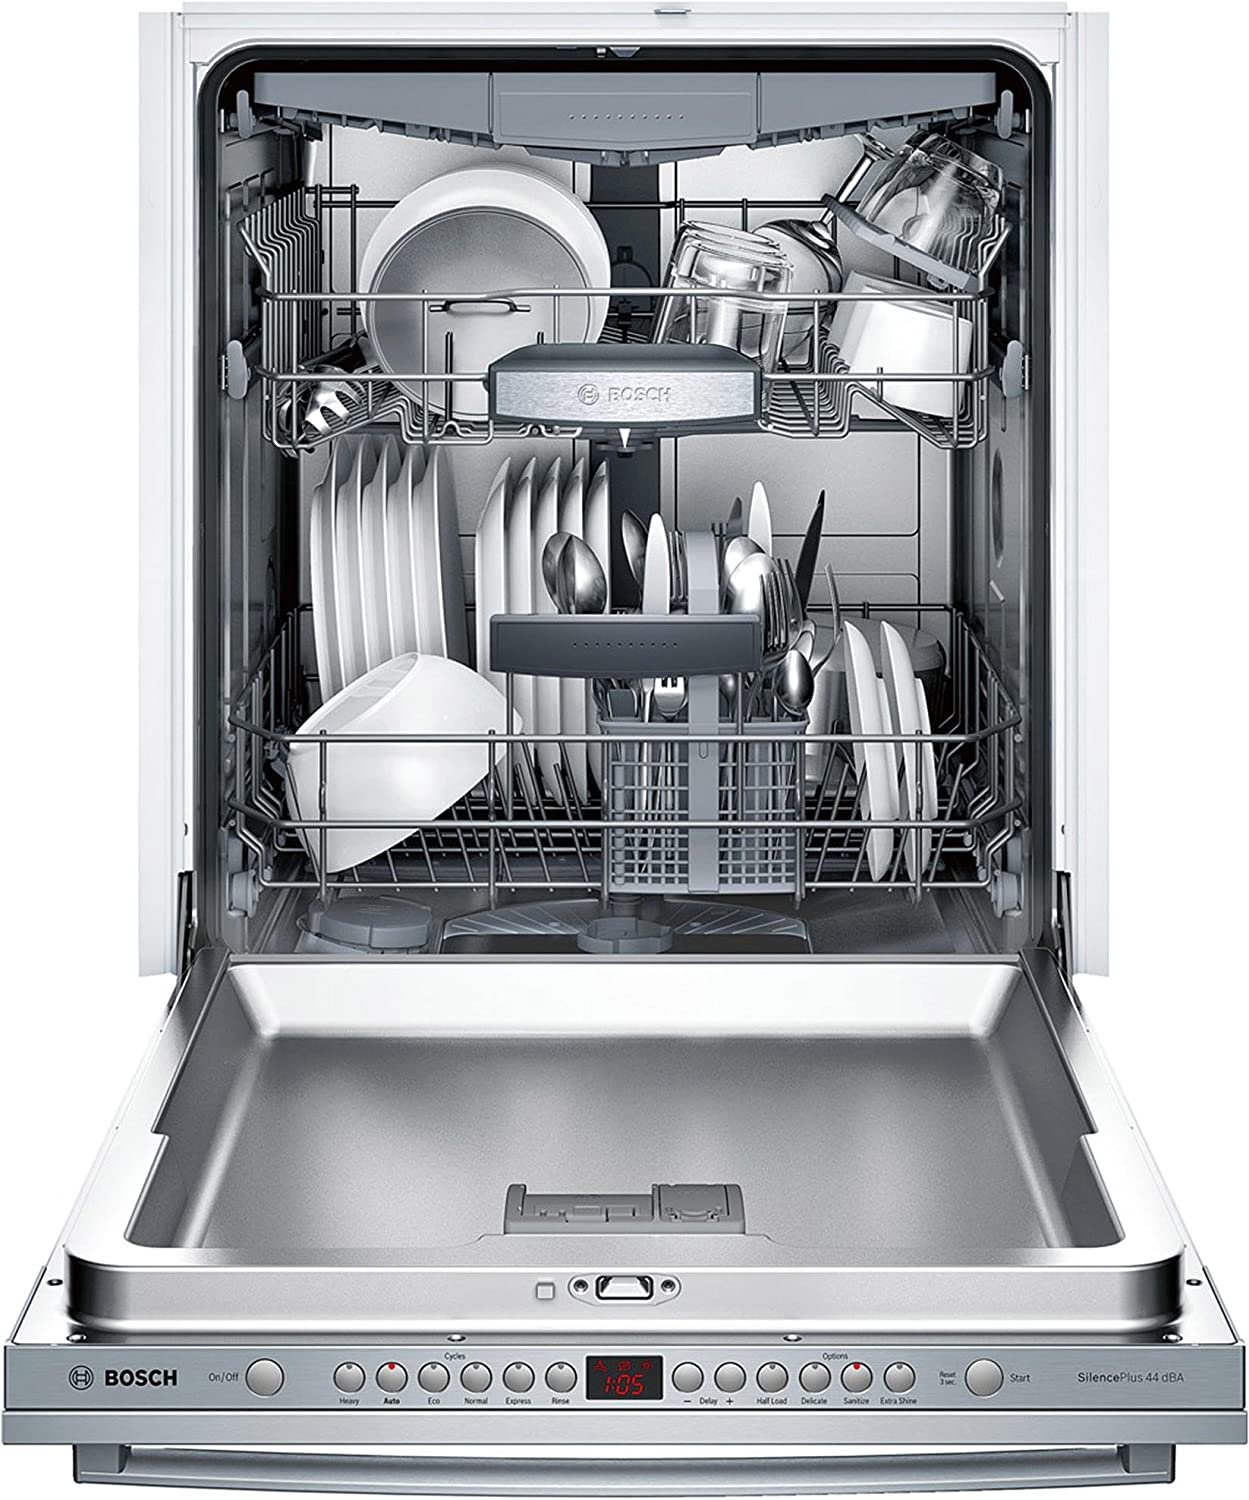 Bosch 800 Series SGX68U55UC 24 Inch Built In Fully Integrated Dishwasher ADA Compliant, NSF Certified, Energy Star Certified in Stainless Steel open